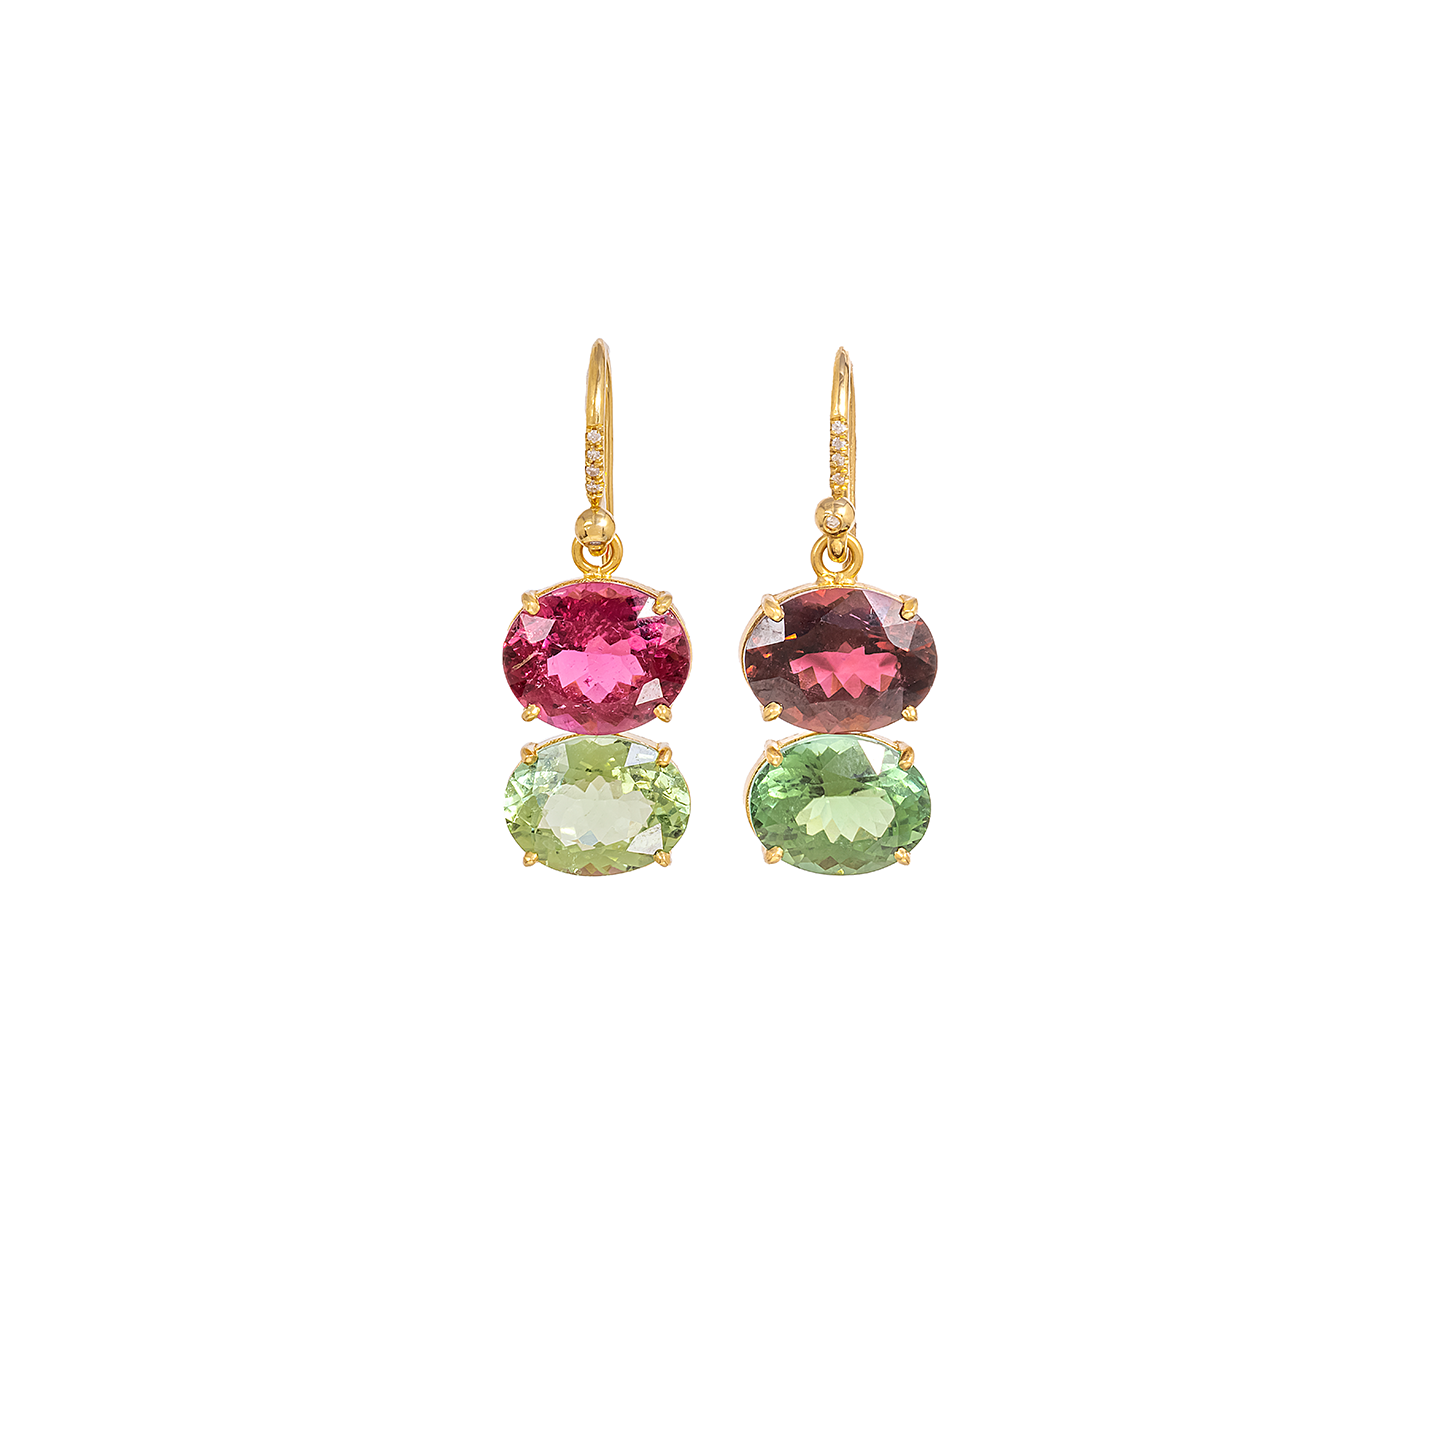 Irene Neuwirth 'Gemmy Gem' One-Of-A-Kind Two Stone Earrings with Rubellite and Green Tourmaline